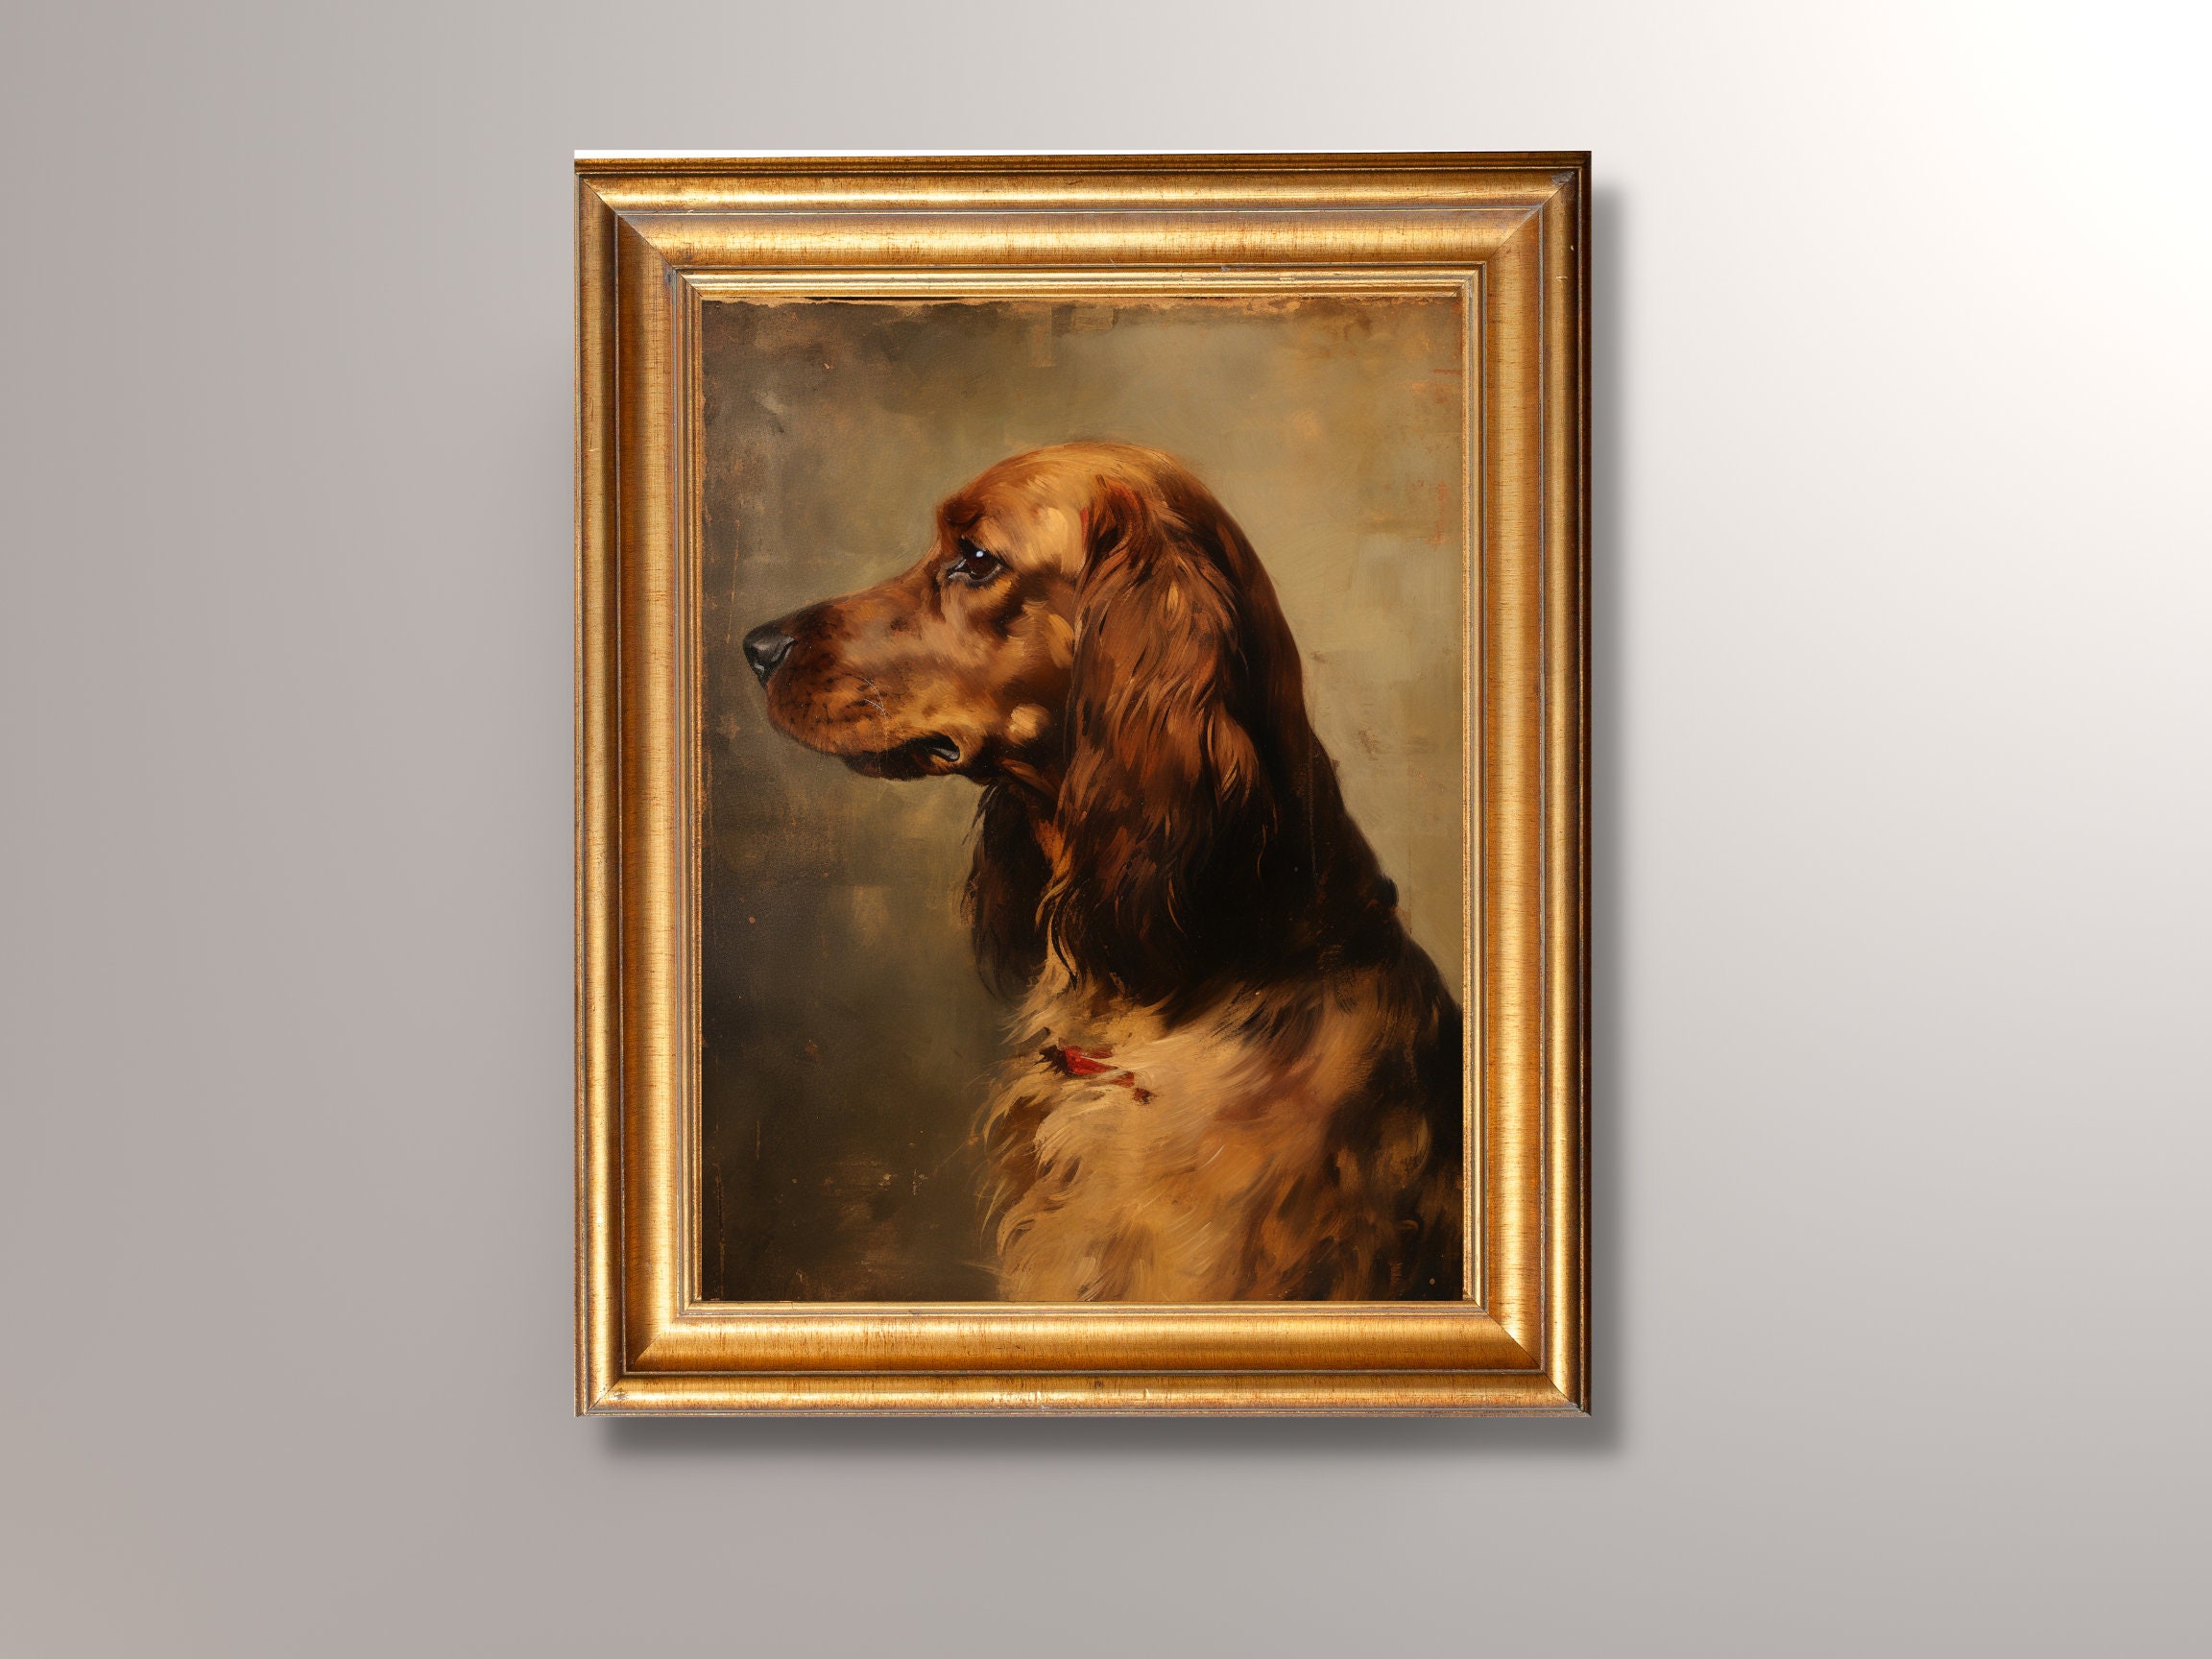 Empire Art Direct Cocker Spaniel Pet Paintings on Printed Glass Encased  with A Black Anodized Frame, 24 x 18 x 1 - Macy's